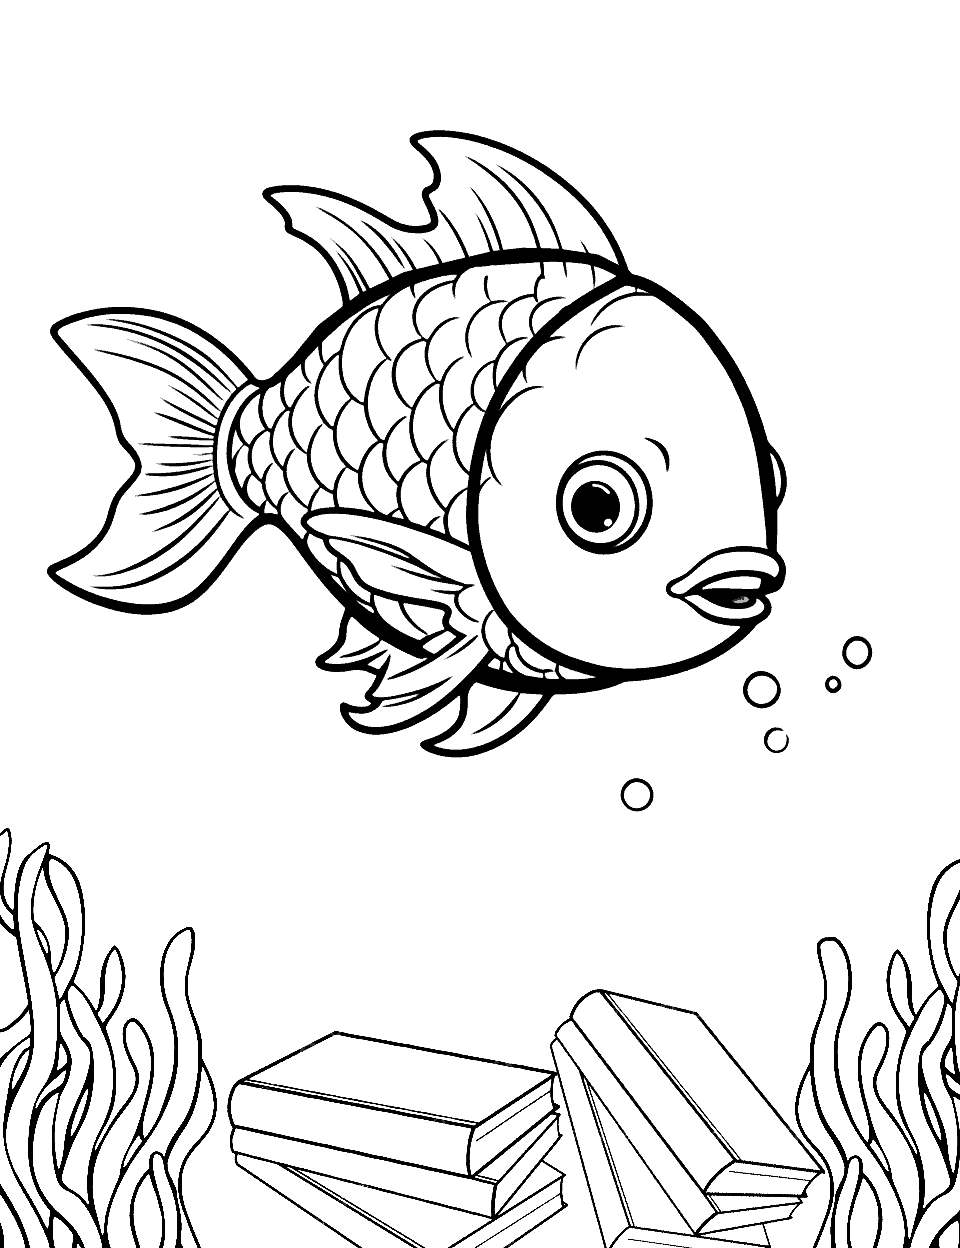 Fish with Underwater Books Coloring Page - Fish in an underwater library with books about the mysteries of the ocean.